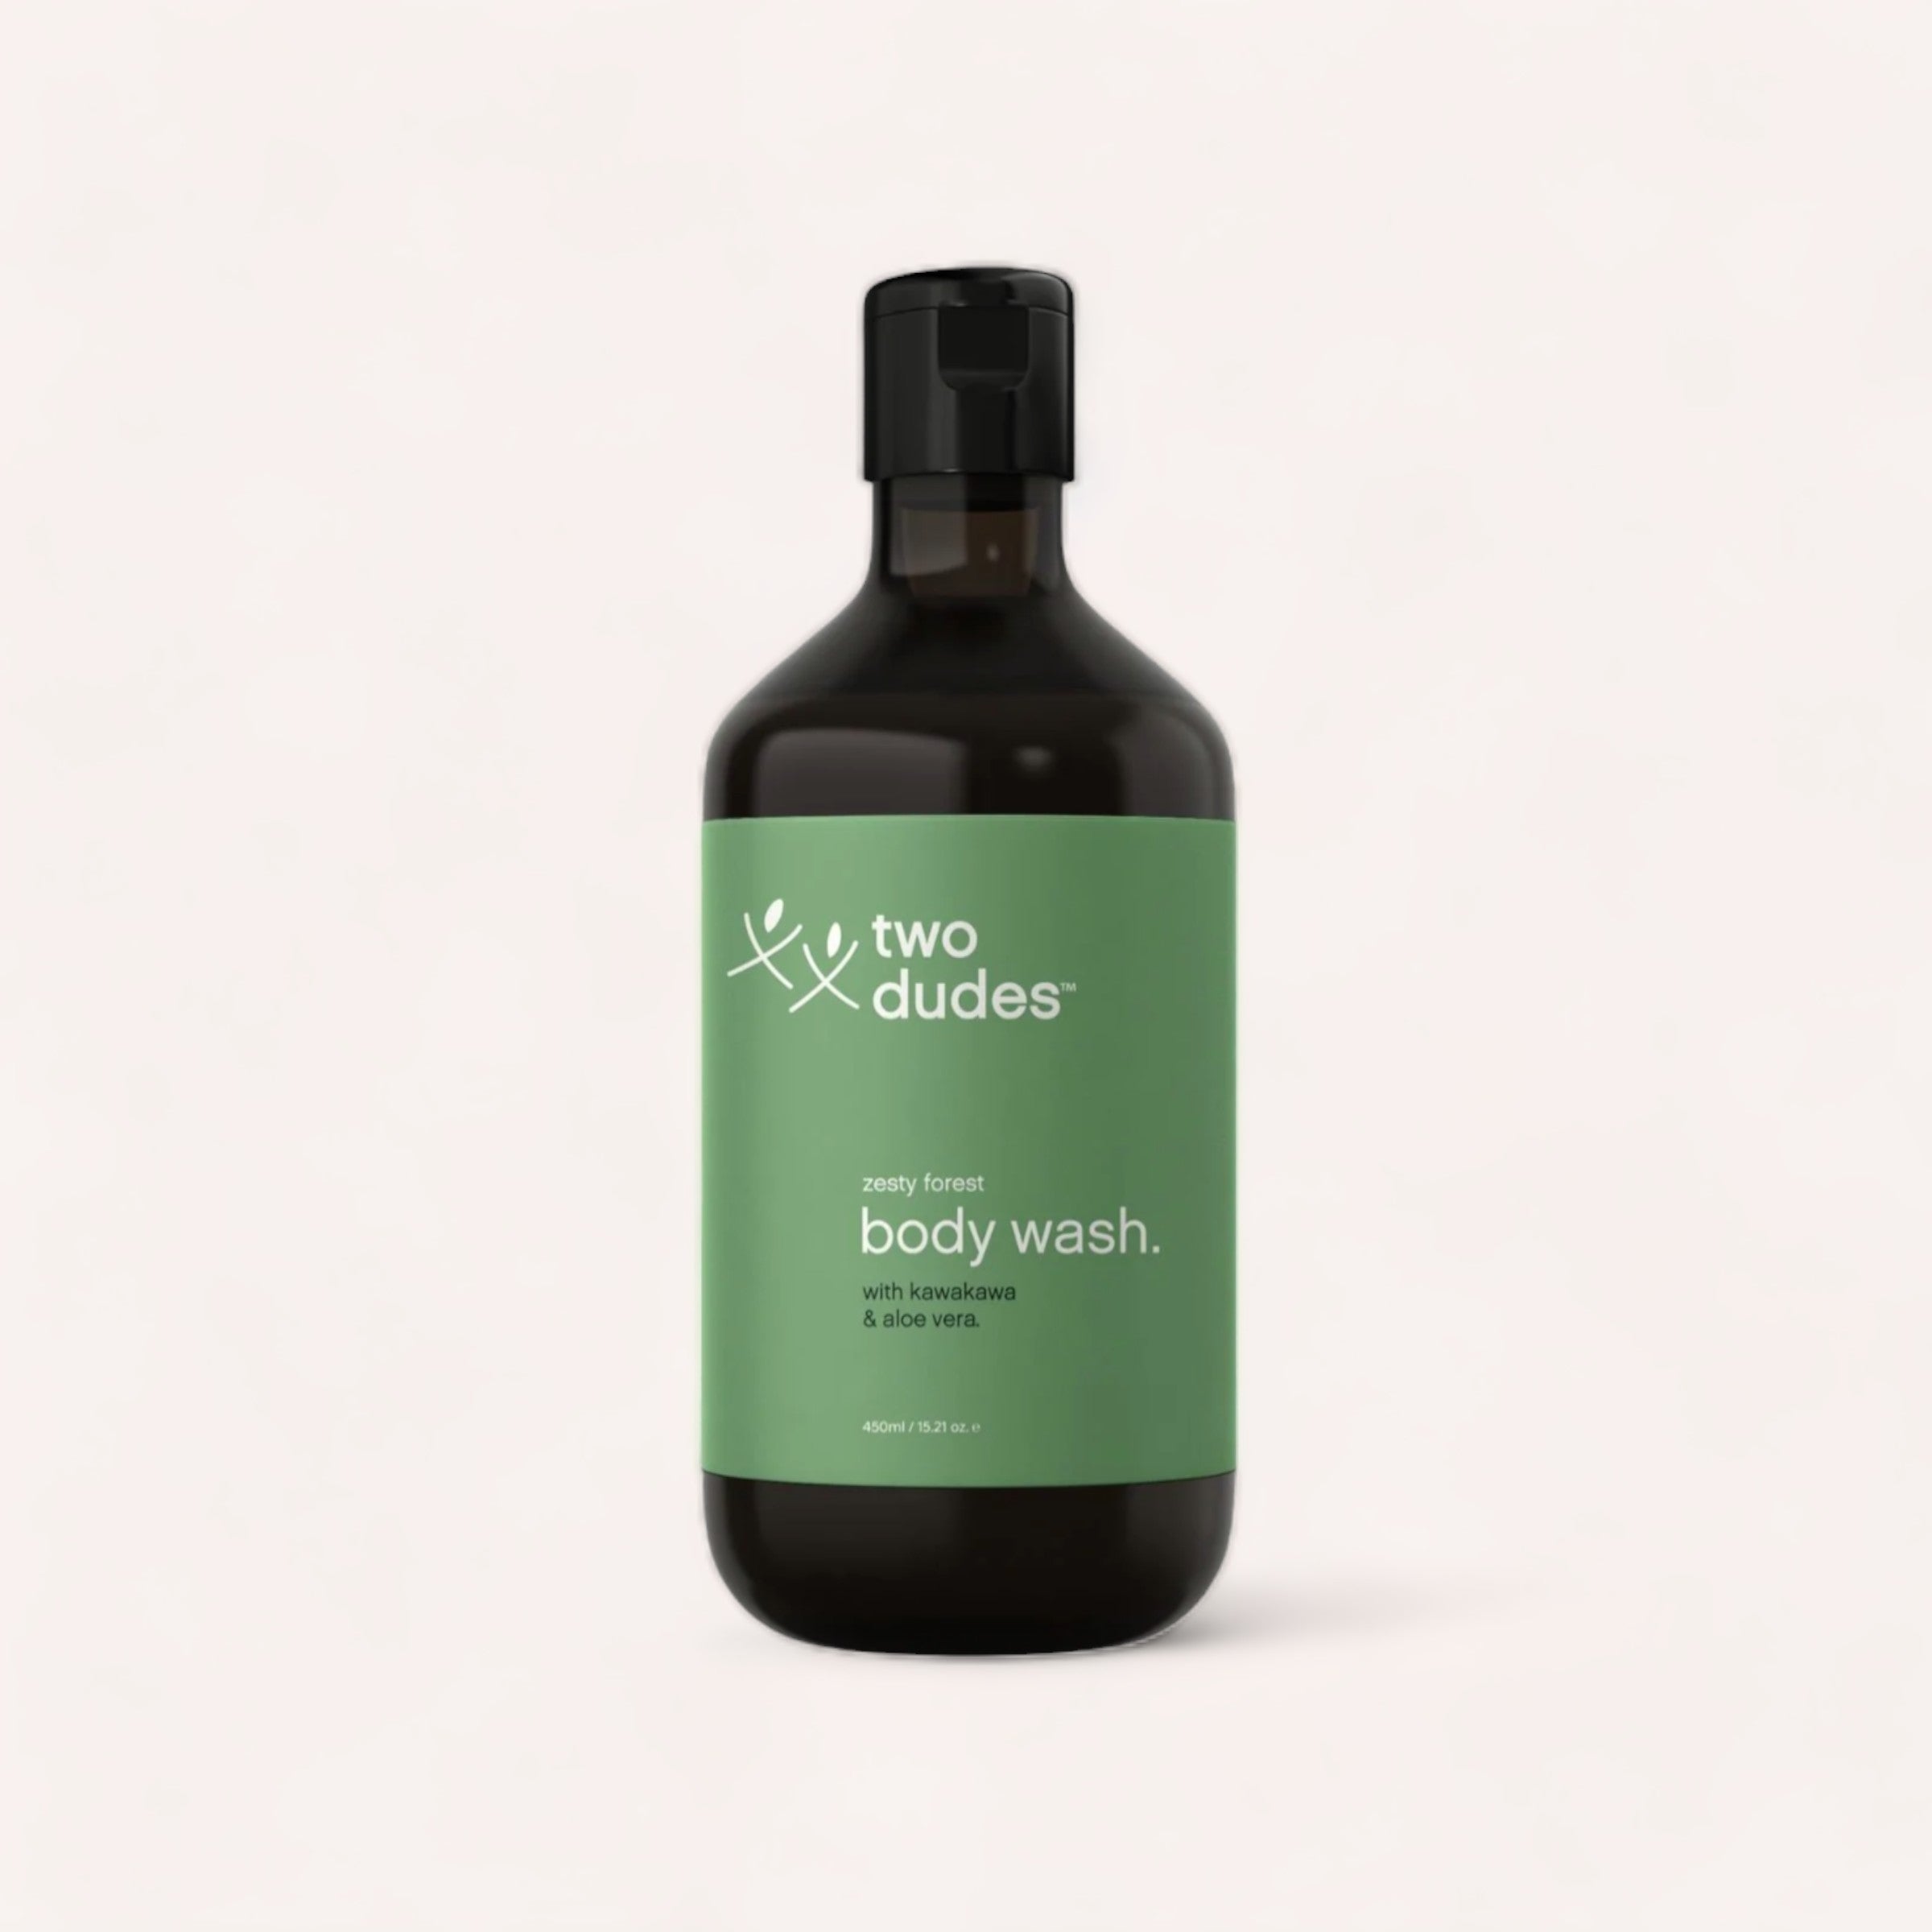 A sleek bottle of "Body Wash by Two Dudes" with a minimalist design featuring a green label, advertising a "zesty forest" scent with kawakawa and aloe vera.